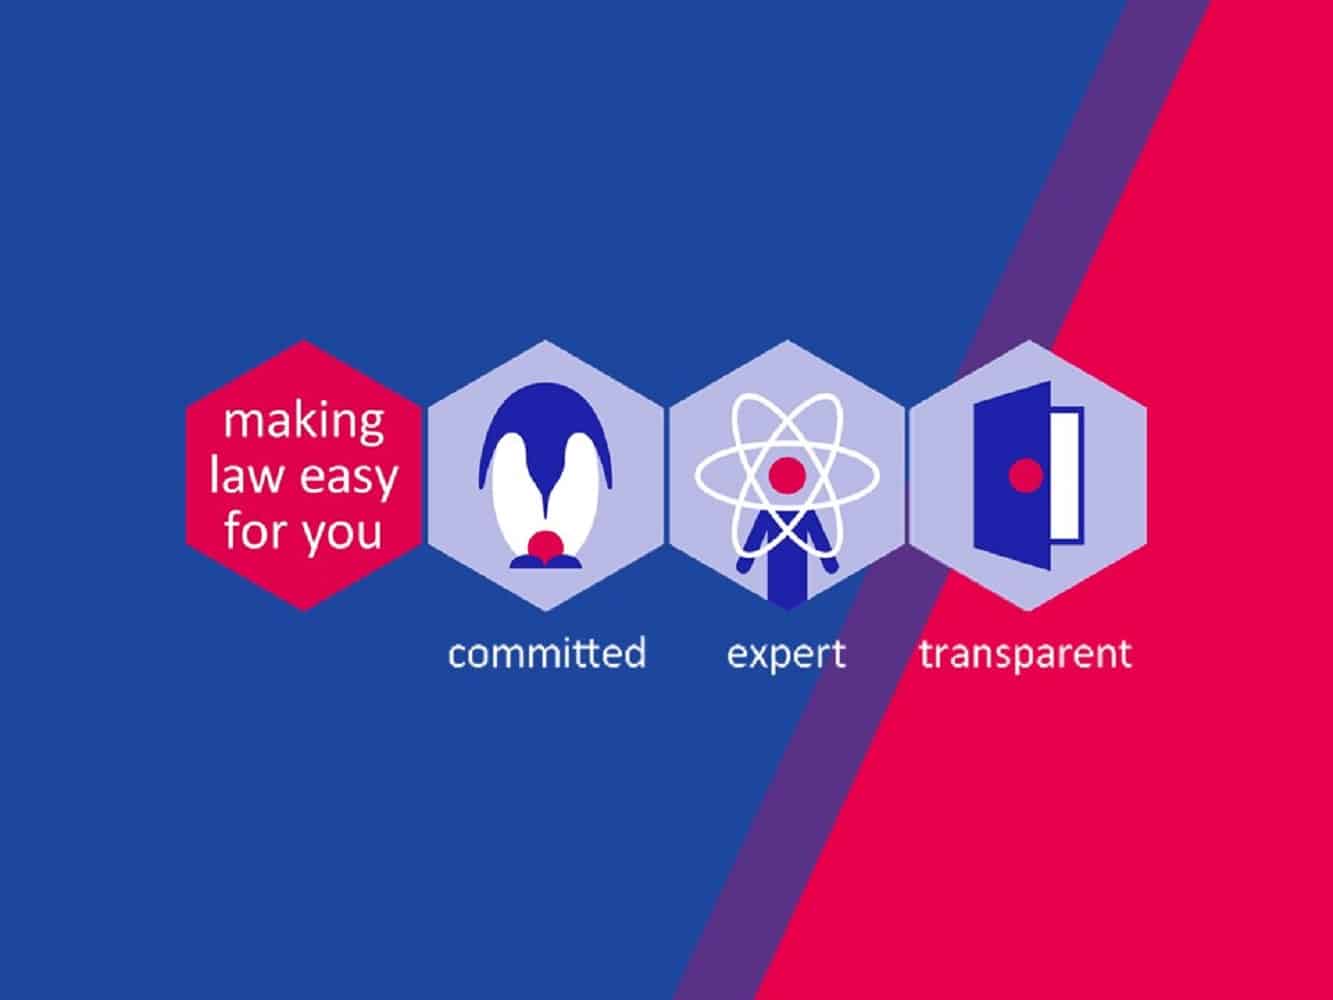 An infographic of Rix & Kay Solicitors values, which are committed, expert, and transparent.